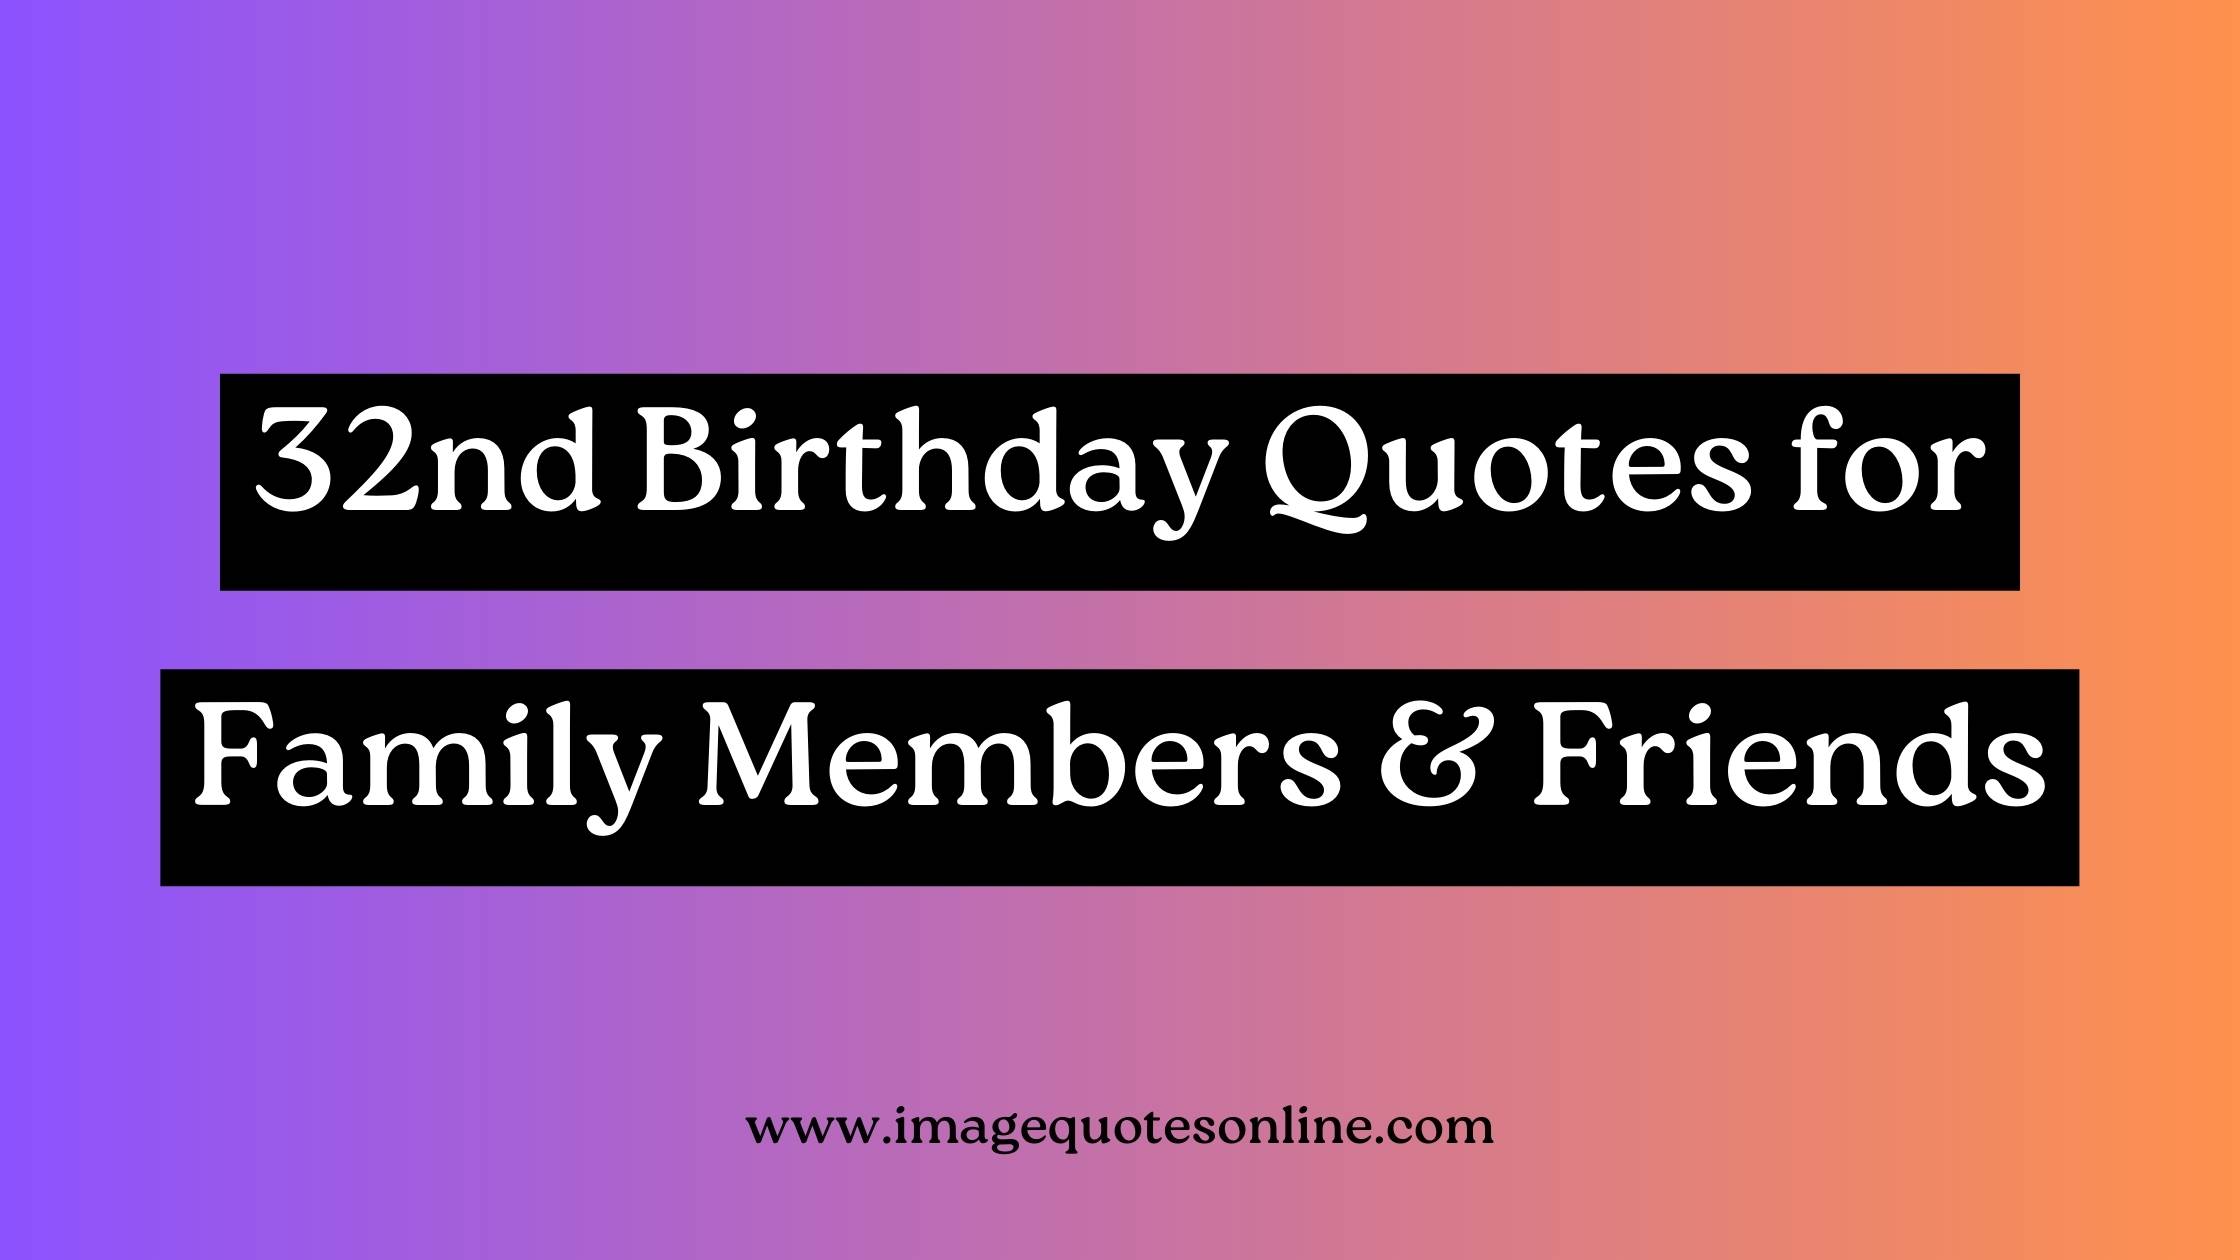 32nd Birthday Quotes